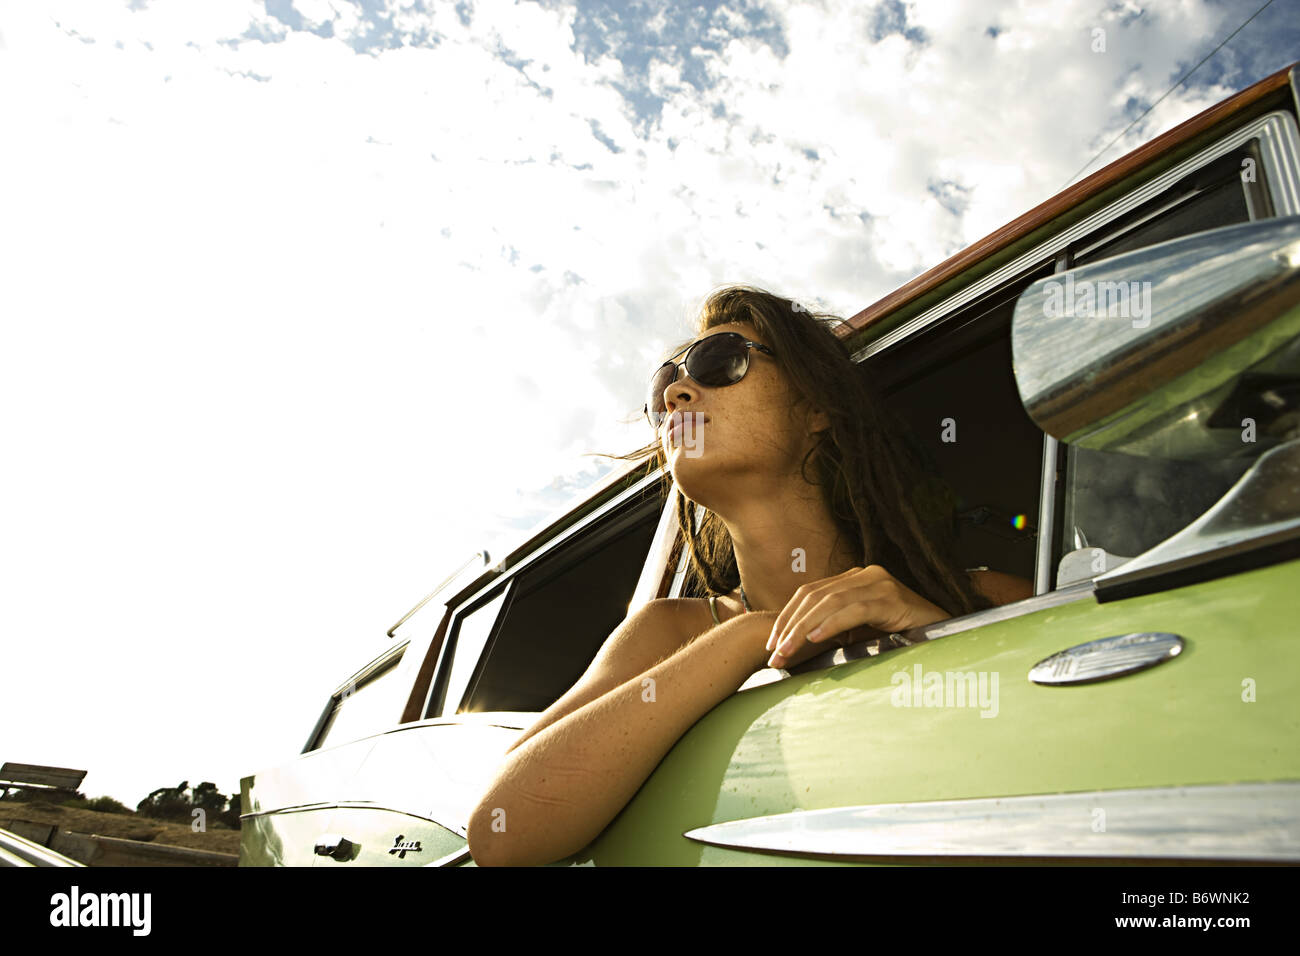 girl leans out of window in vintage car at beach Stock Photo